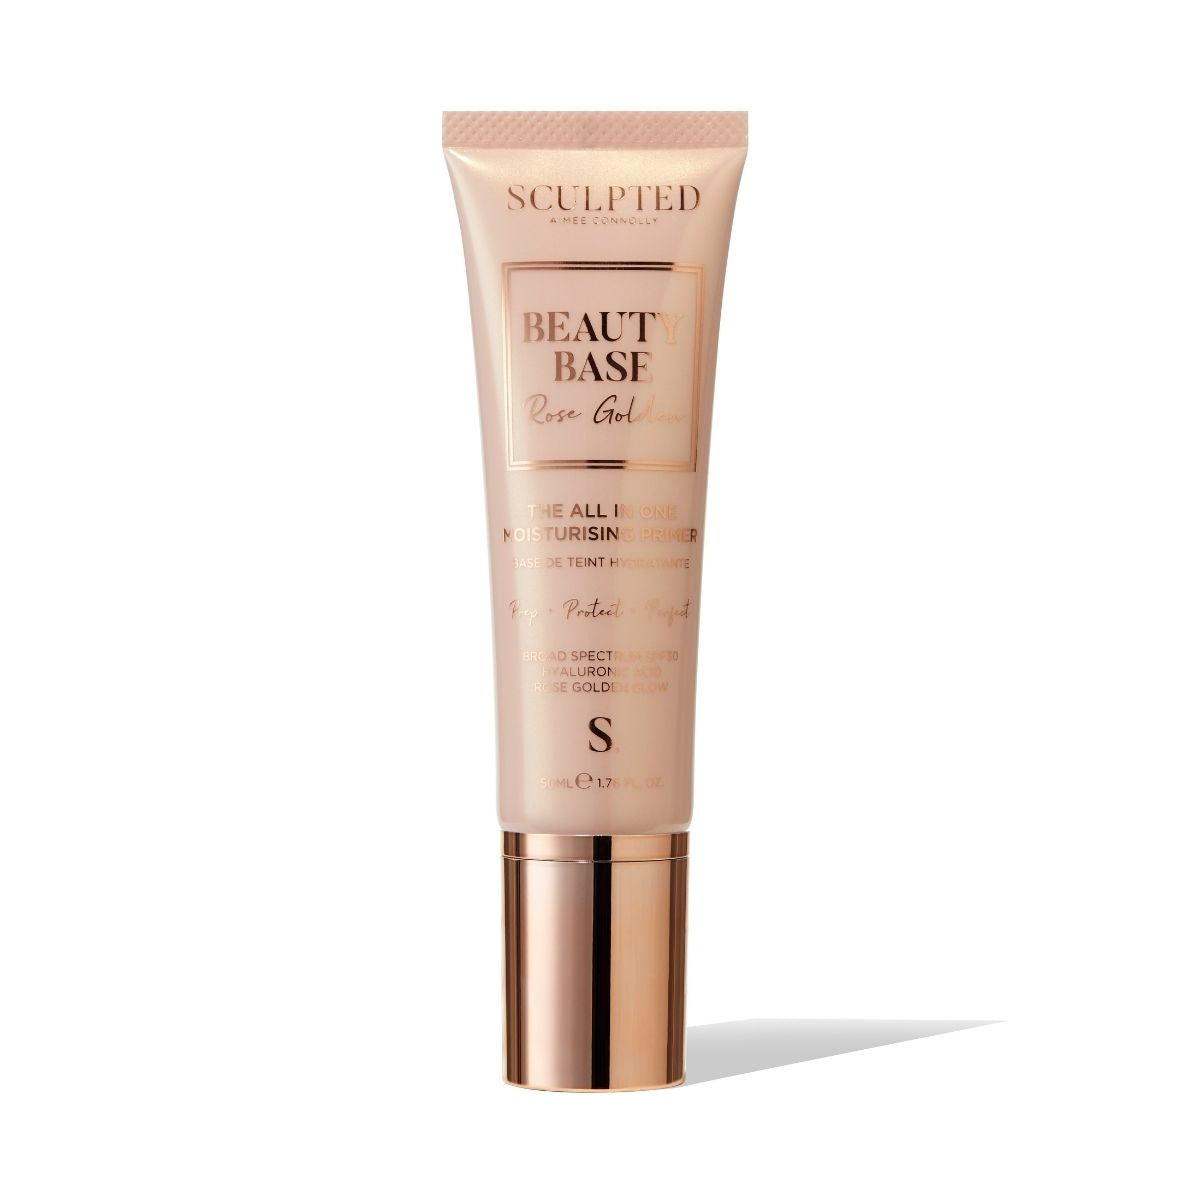 Sculpted By Aimee Connolly Beauty Base Rose Golden Primer SPF 30